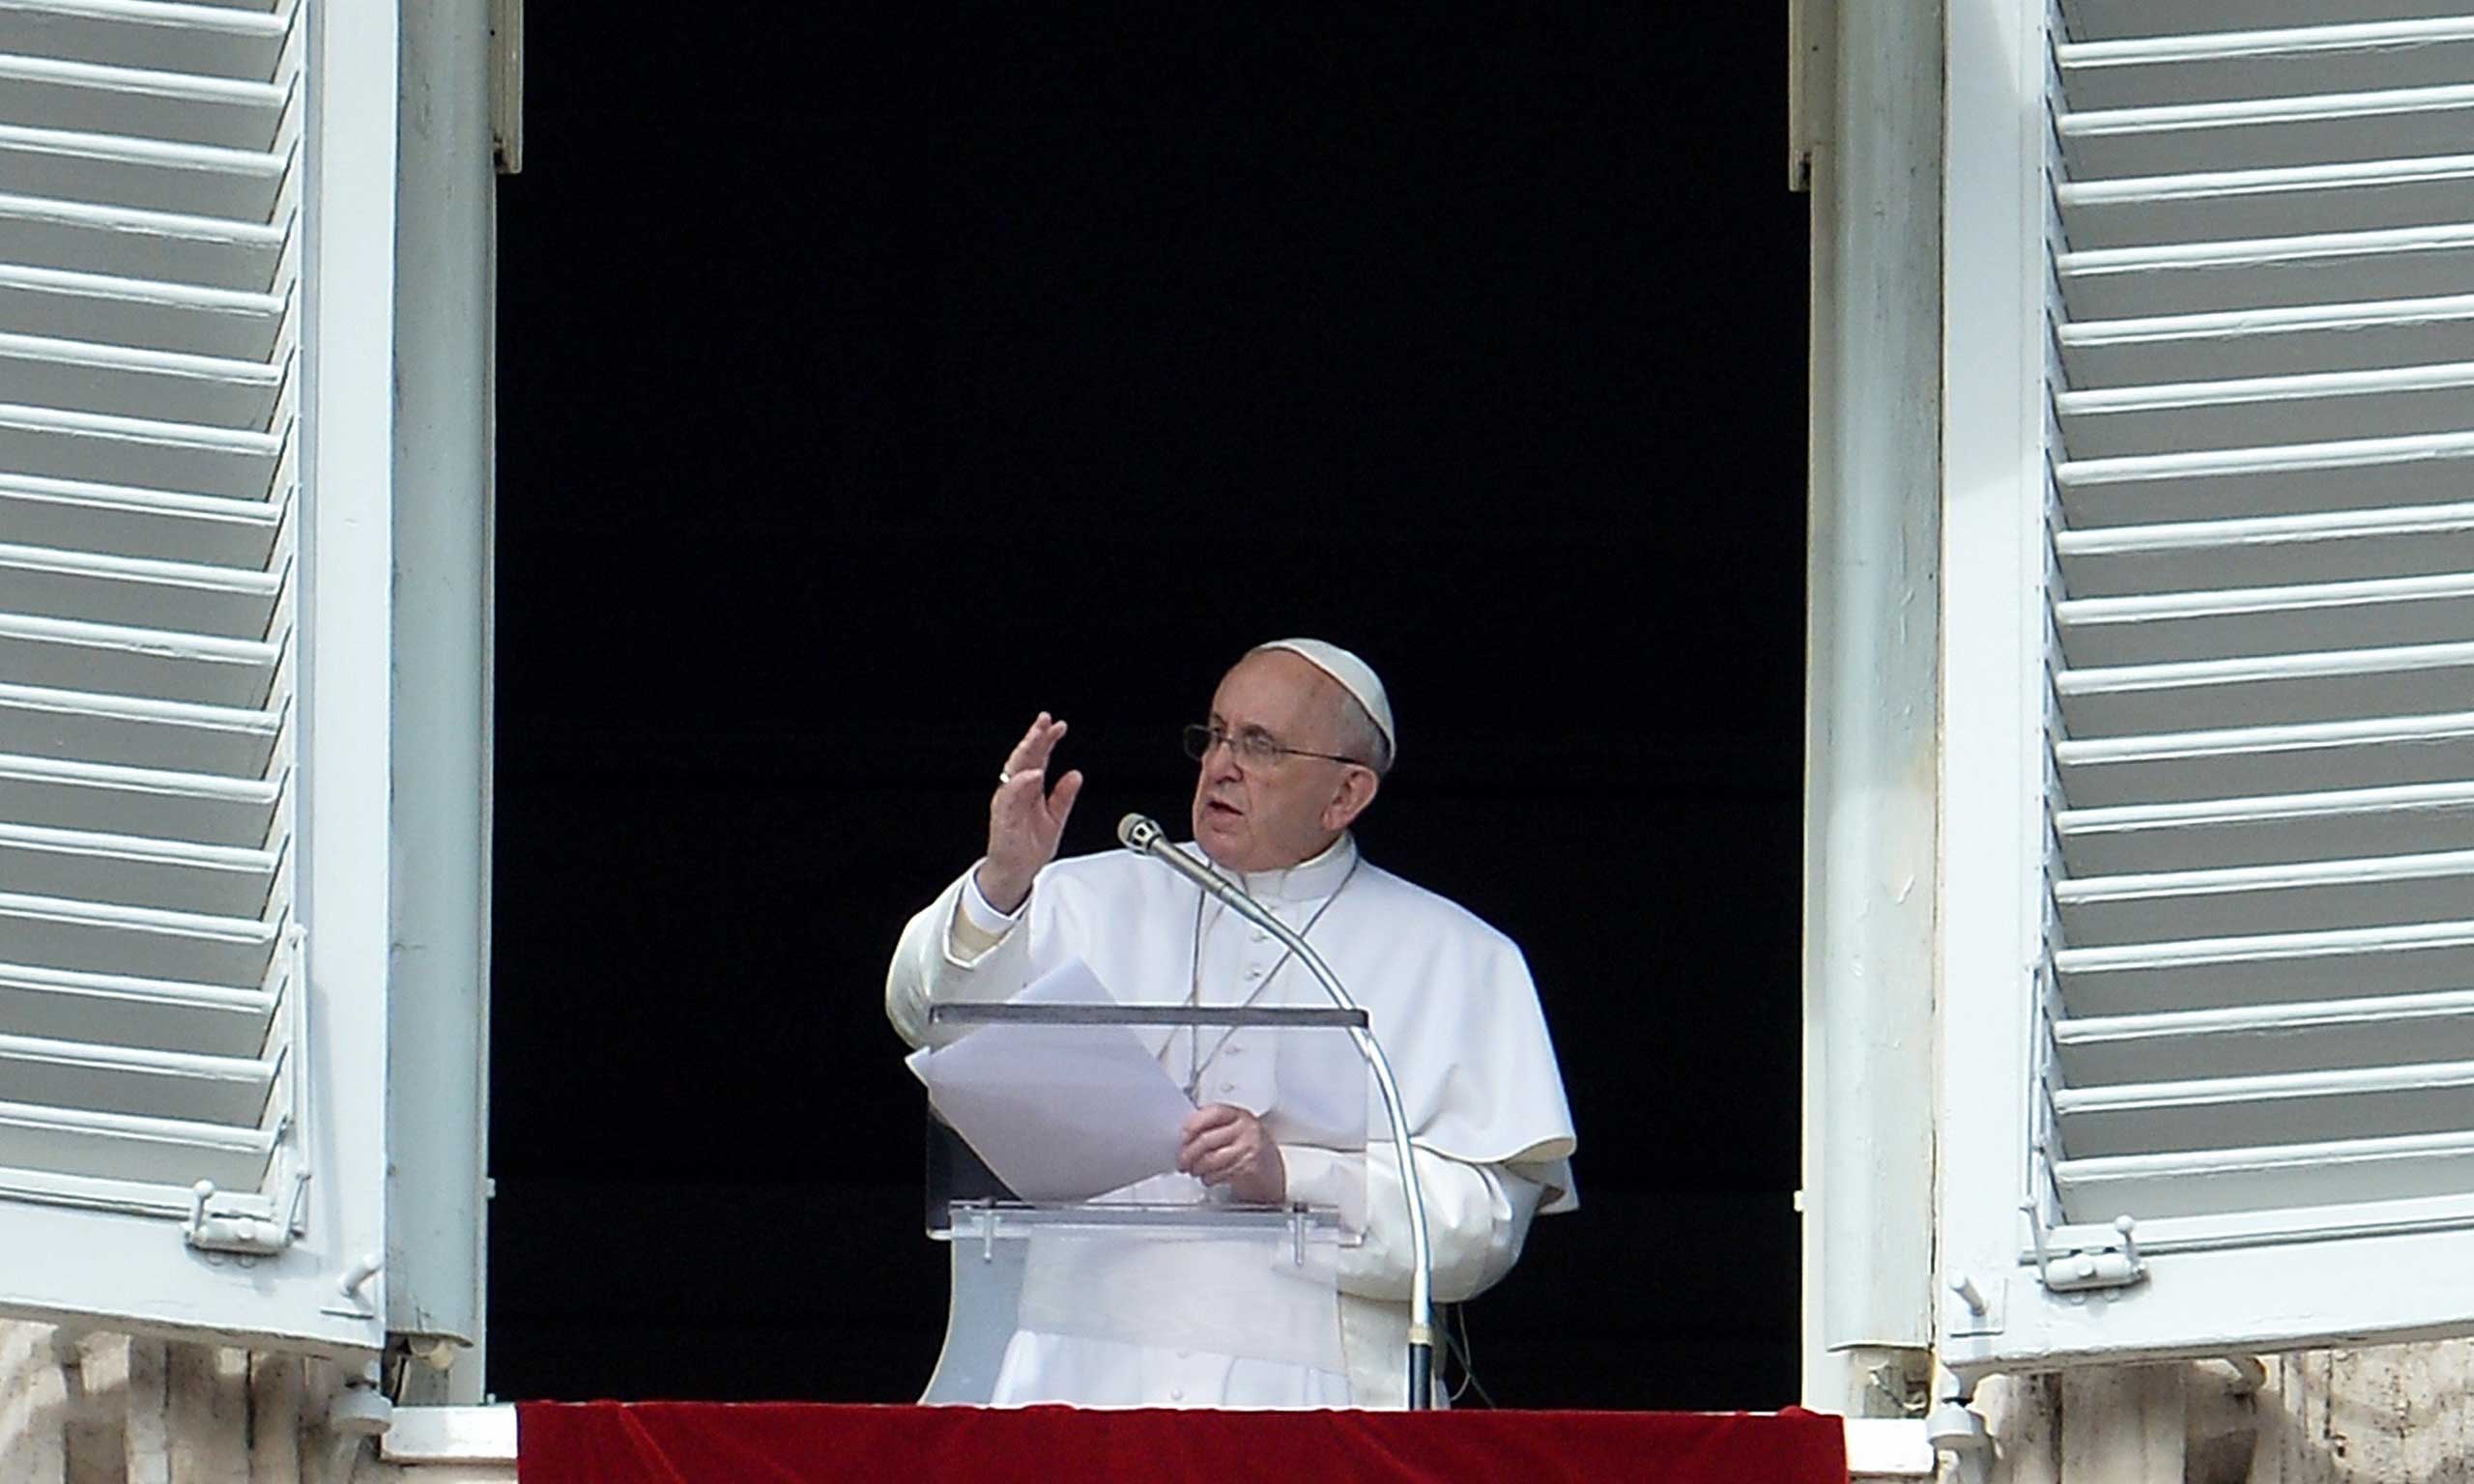 Pope Francis addresses the crowd from the window of the apostolic palace overlooking Saint Peter's square during his Angelus prayer on Feb. 22, 2015 at the Vatican. (Tiziana Fabi—AFP/Getty Images)